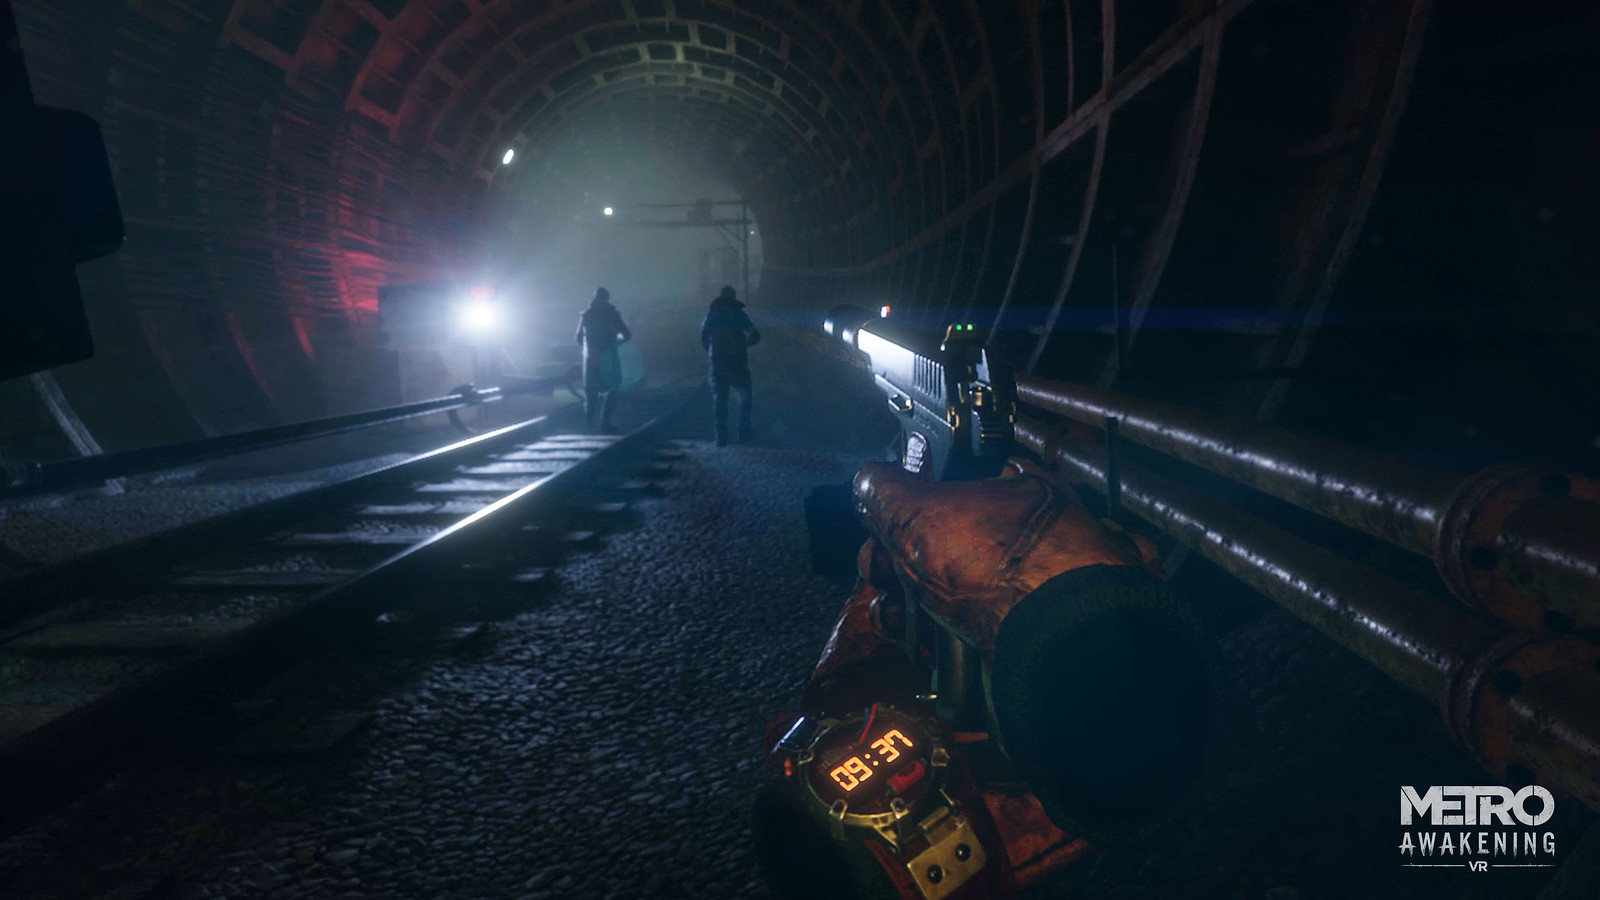 A dark tunnel stretches into the far distance. Two figures are patrolling along the train tracks in front of the viewer, oblivious to the player crouched in the shadows behind them, one hand bracing the other as they aim a pistol at the retreating patrol’s backs. The player’s hands are gloved, and on wrist of one arm is a timepiece, with a glowing digital face stating 09:37.